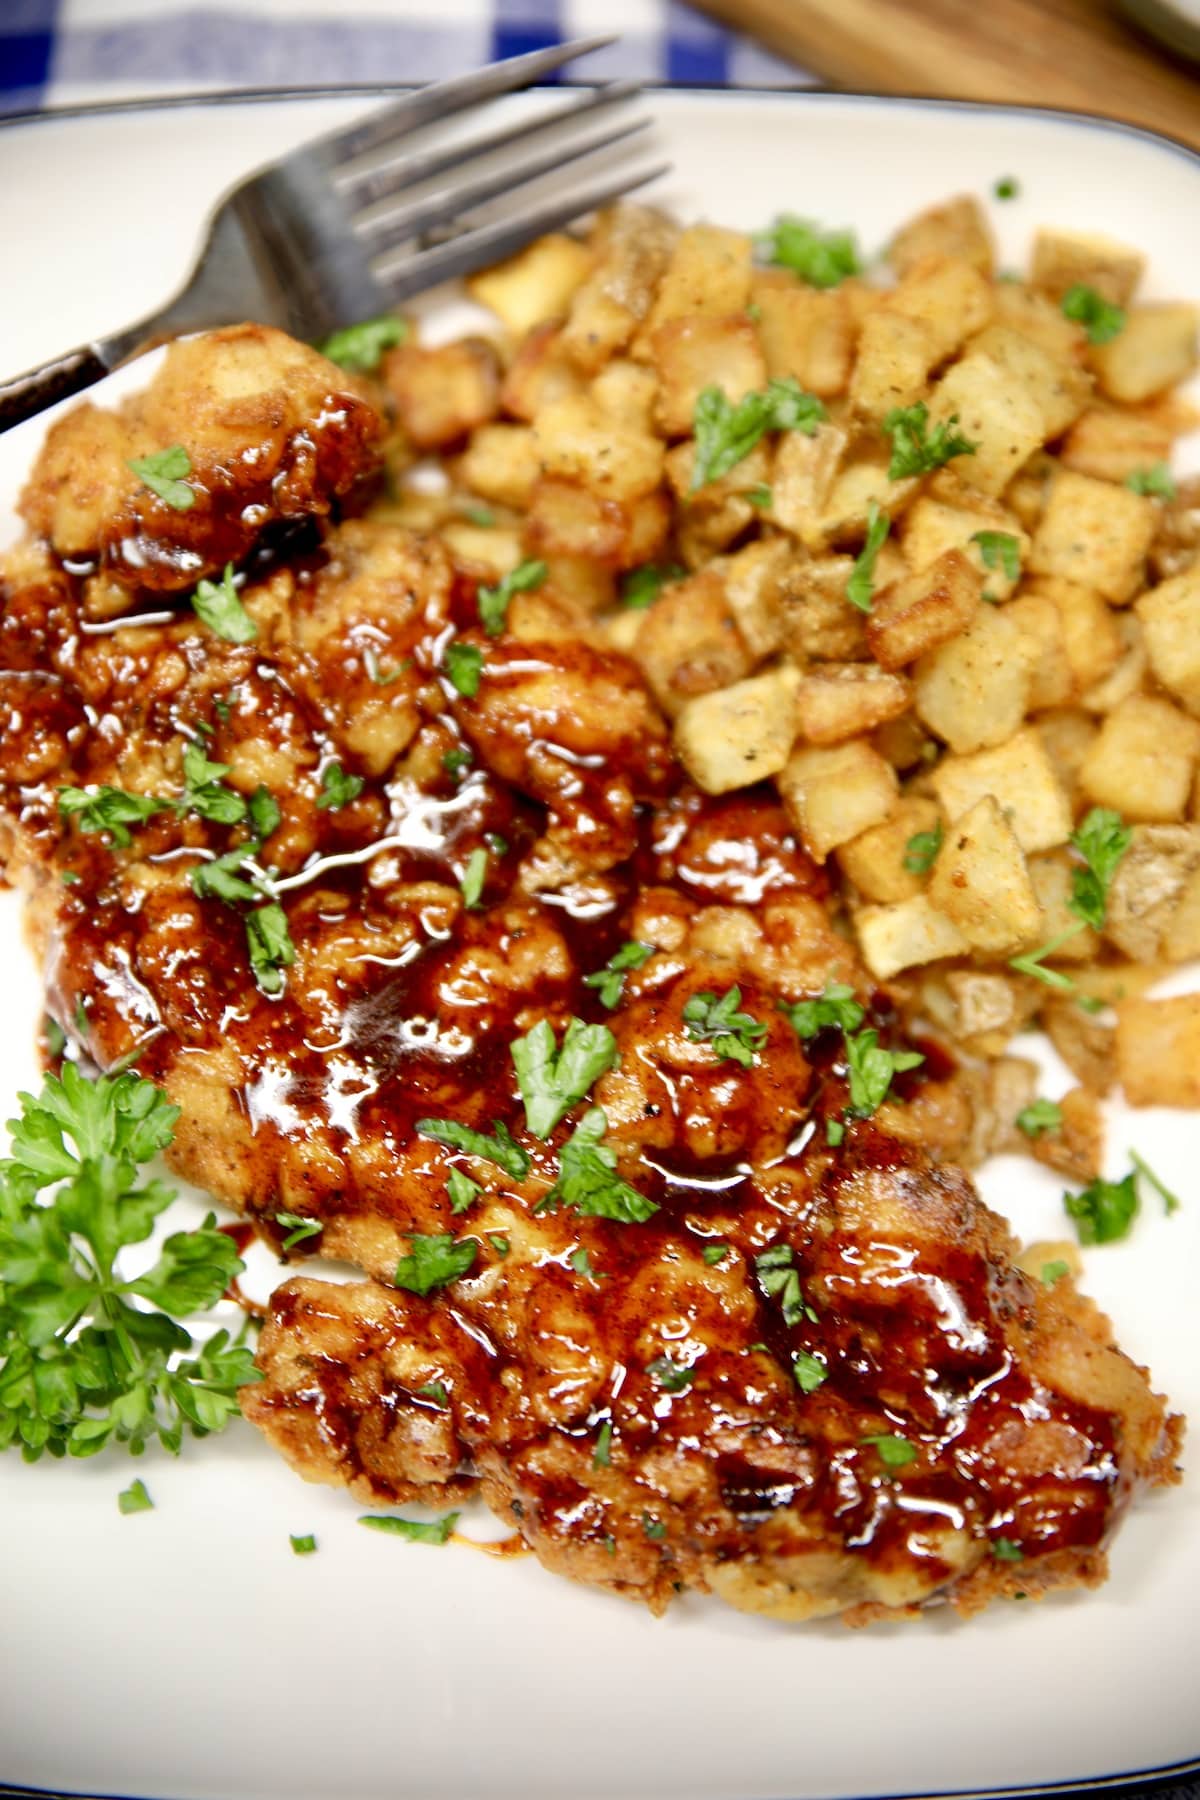 Honey chipotle fried chicken on a plate with cubed potatoes.